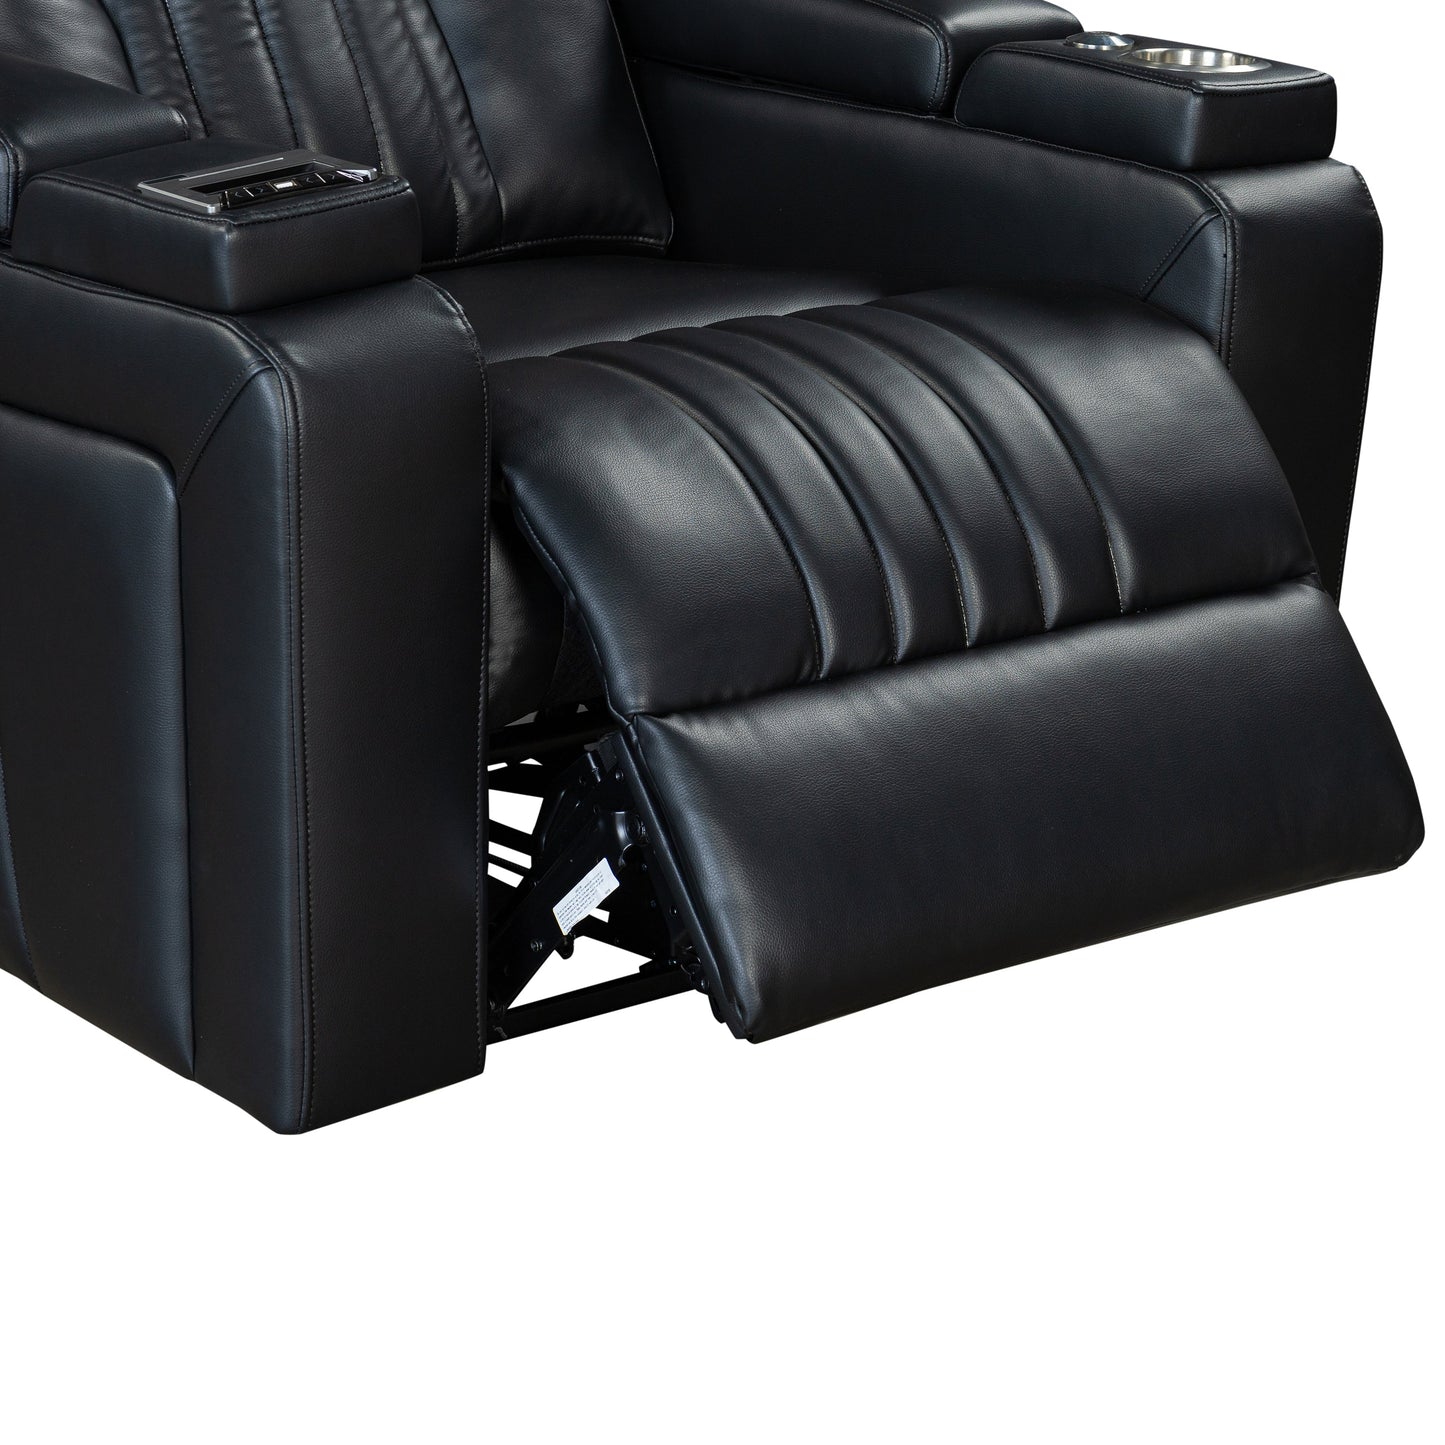 PU Leather Power Recliner Home Theater Recliner with Power Adjustable Headrest, Wireless Charging Device, USB Port, Storage Arms, Cup Holder and Swivel Tray Table for Living Room, Black